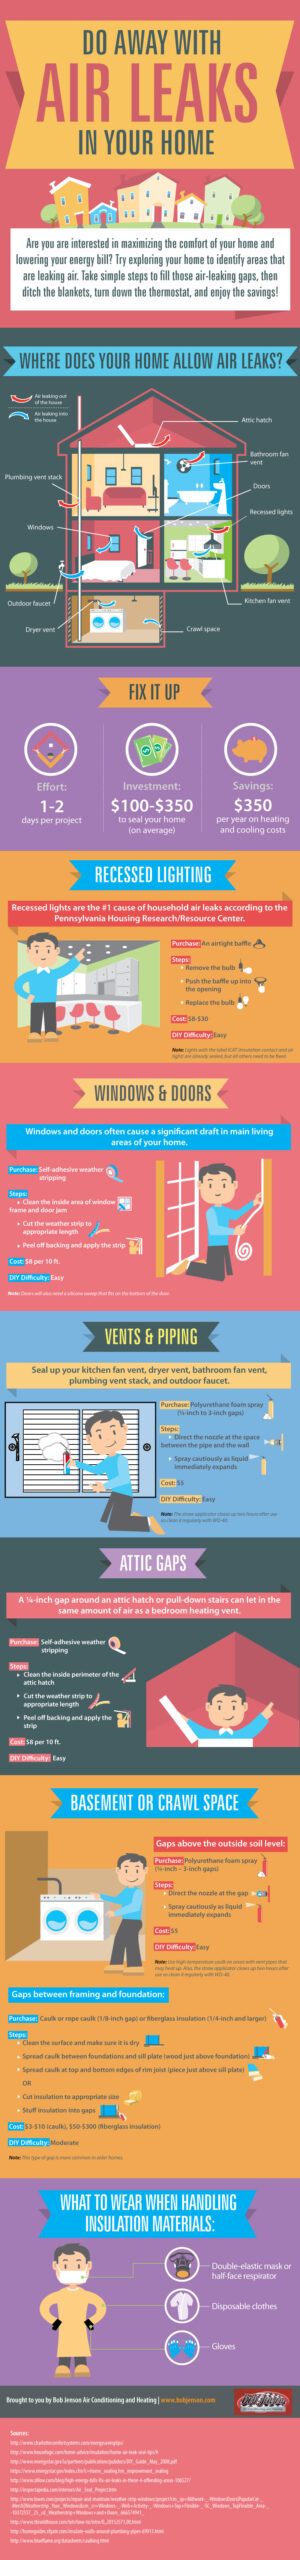 An infographic on how to identify air leaks In your home